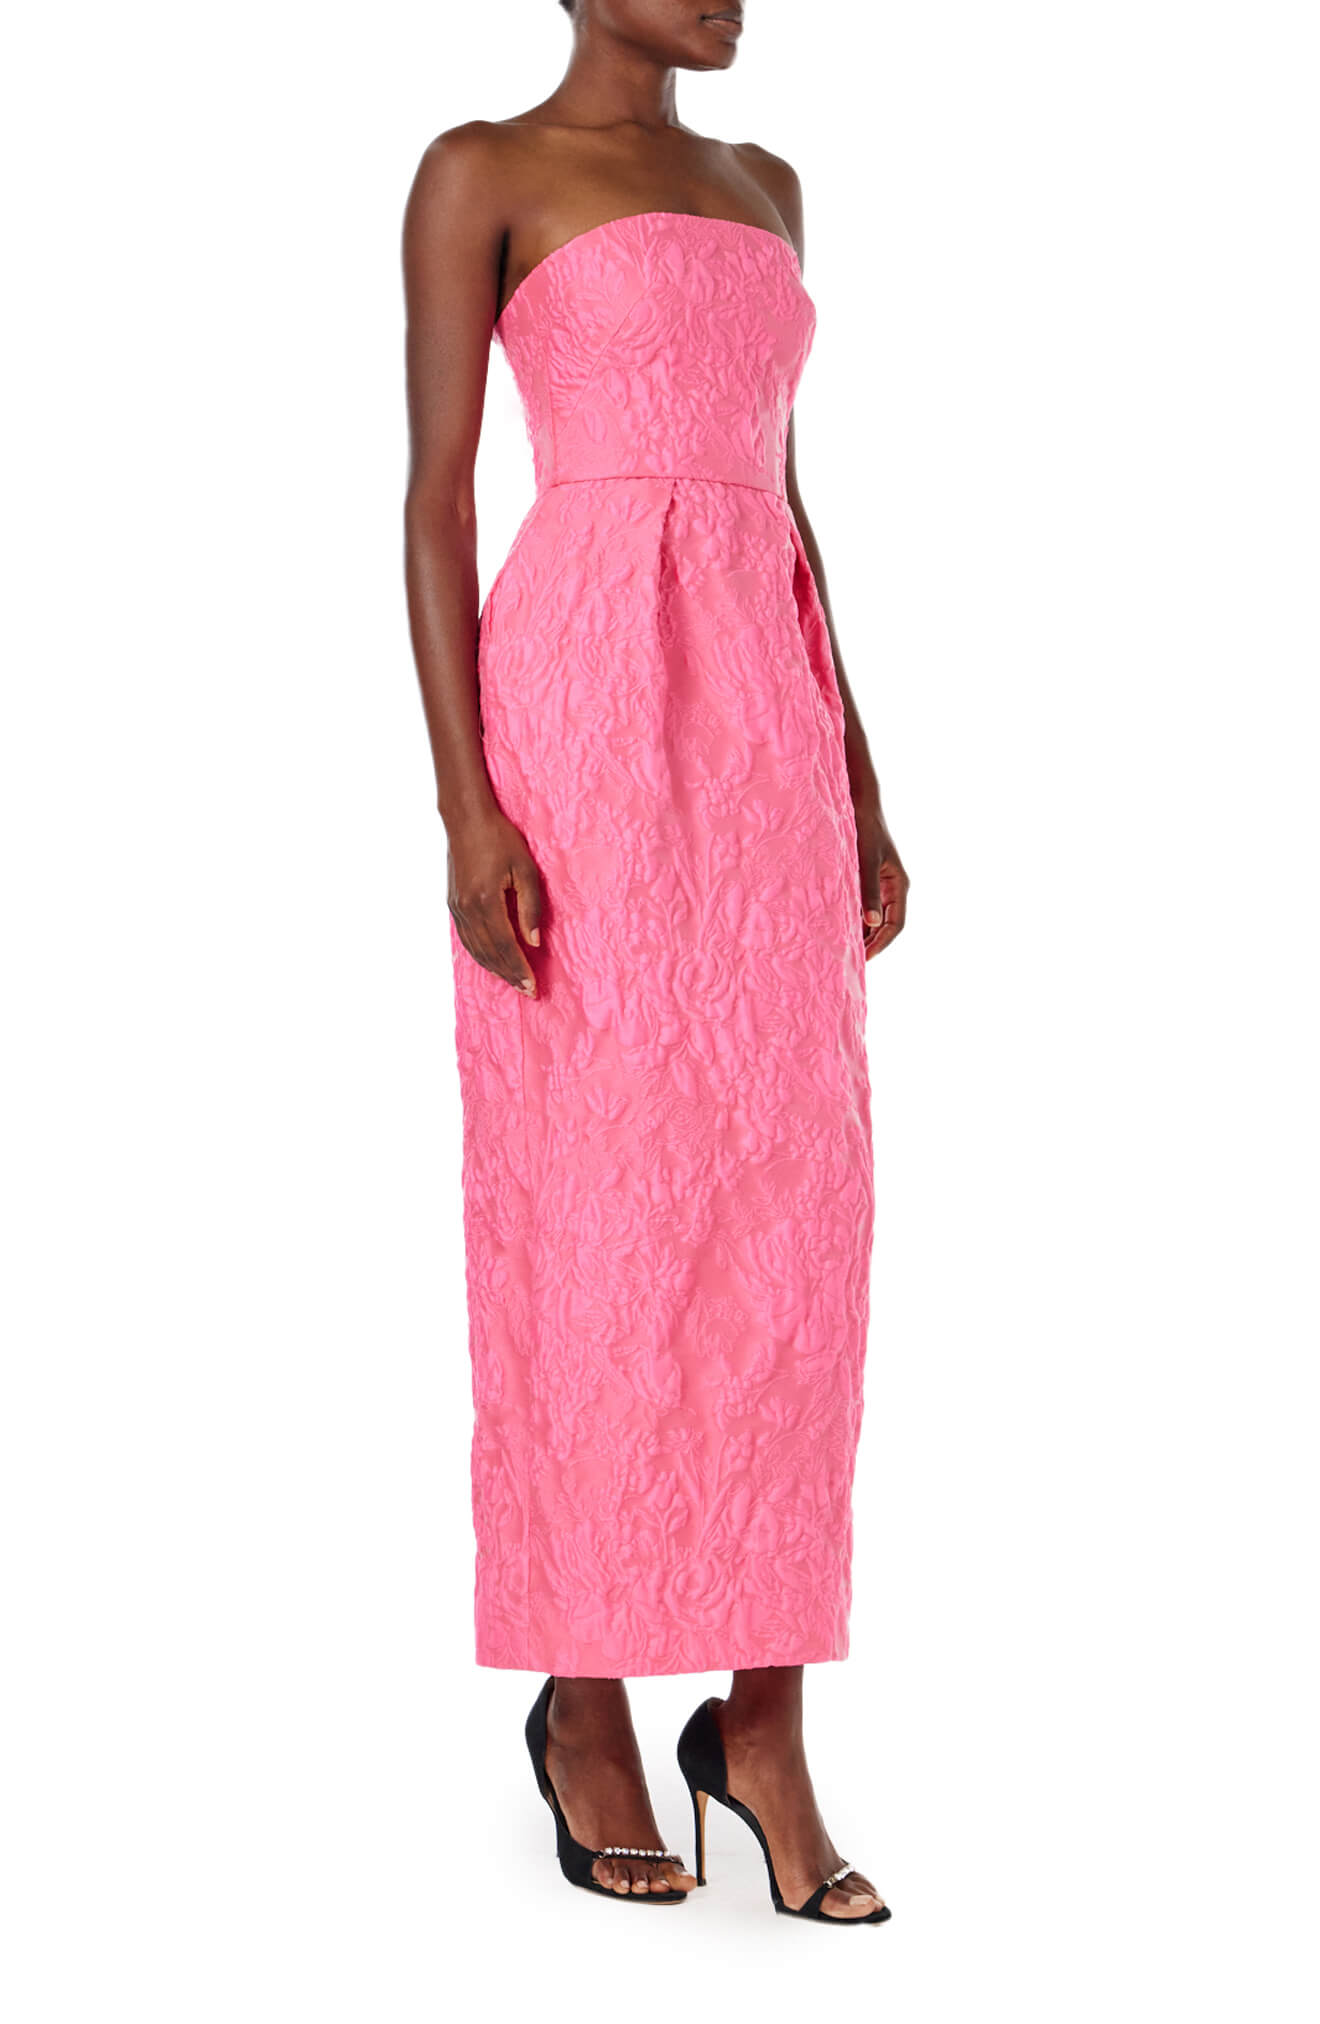 Monique Lhuillier Spring 2024 strapless midi length dress in fuchsia jacquard with tulip skirt and pockets - front.